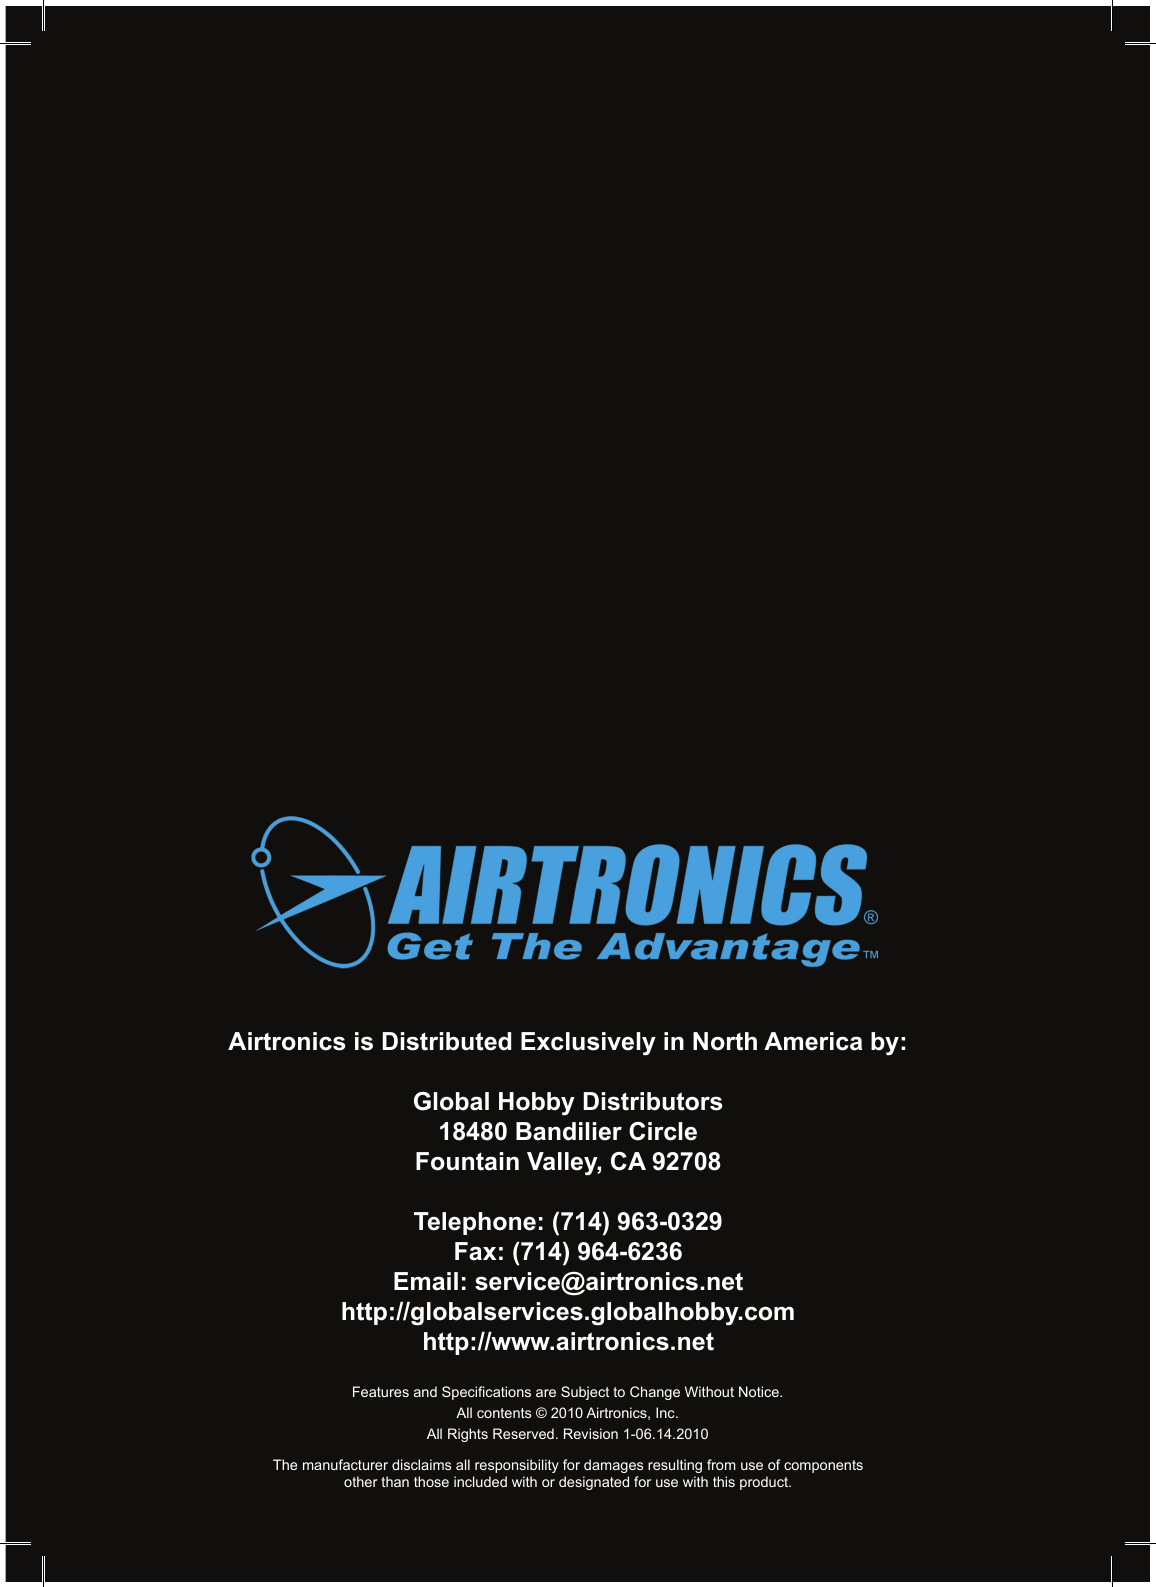 Page 92Airtronics is Distributed Exclusively in North America by:Global Hobby Distributors18480 Bandilier CircleFountain Valley, CA 92708Telephone: (714) 963-0329Fax: (714) 964-6236Email: service@airtronics.nethttp://globalservices.globalhobby.comhttp://www.airtronics.netFeatures and Specications are Subject to Change Without Notice.All contents © 2010 Airtronics, Inc.All Rights Reserved. Revision 1-06.14.2010The manufacturer disclaims all responsibility for damages resulting from use of componentsother than those included with or designated for use with this product.